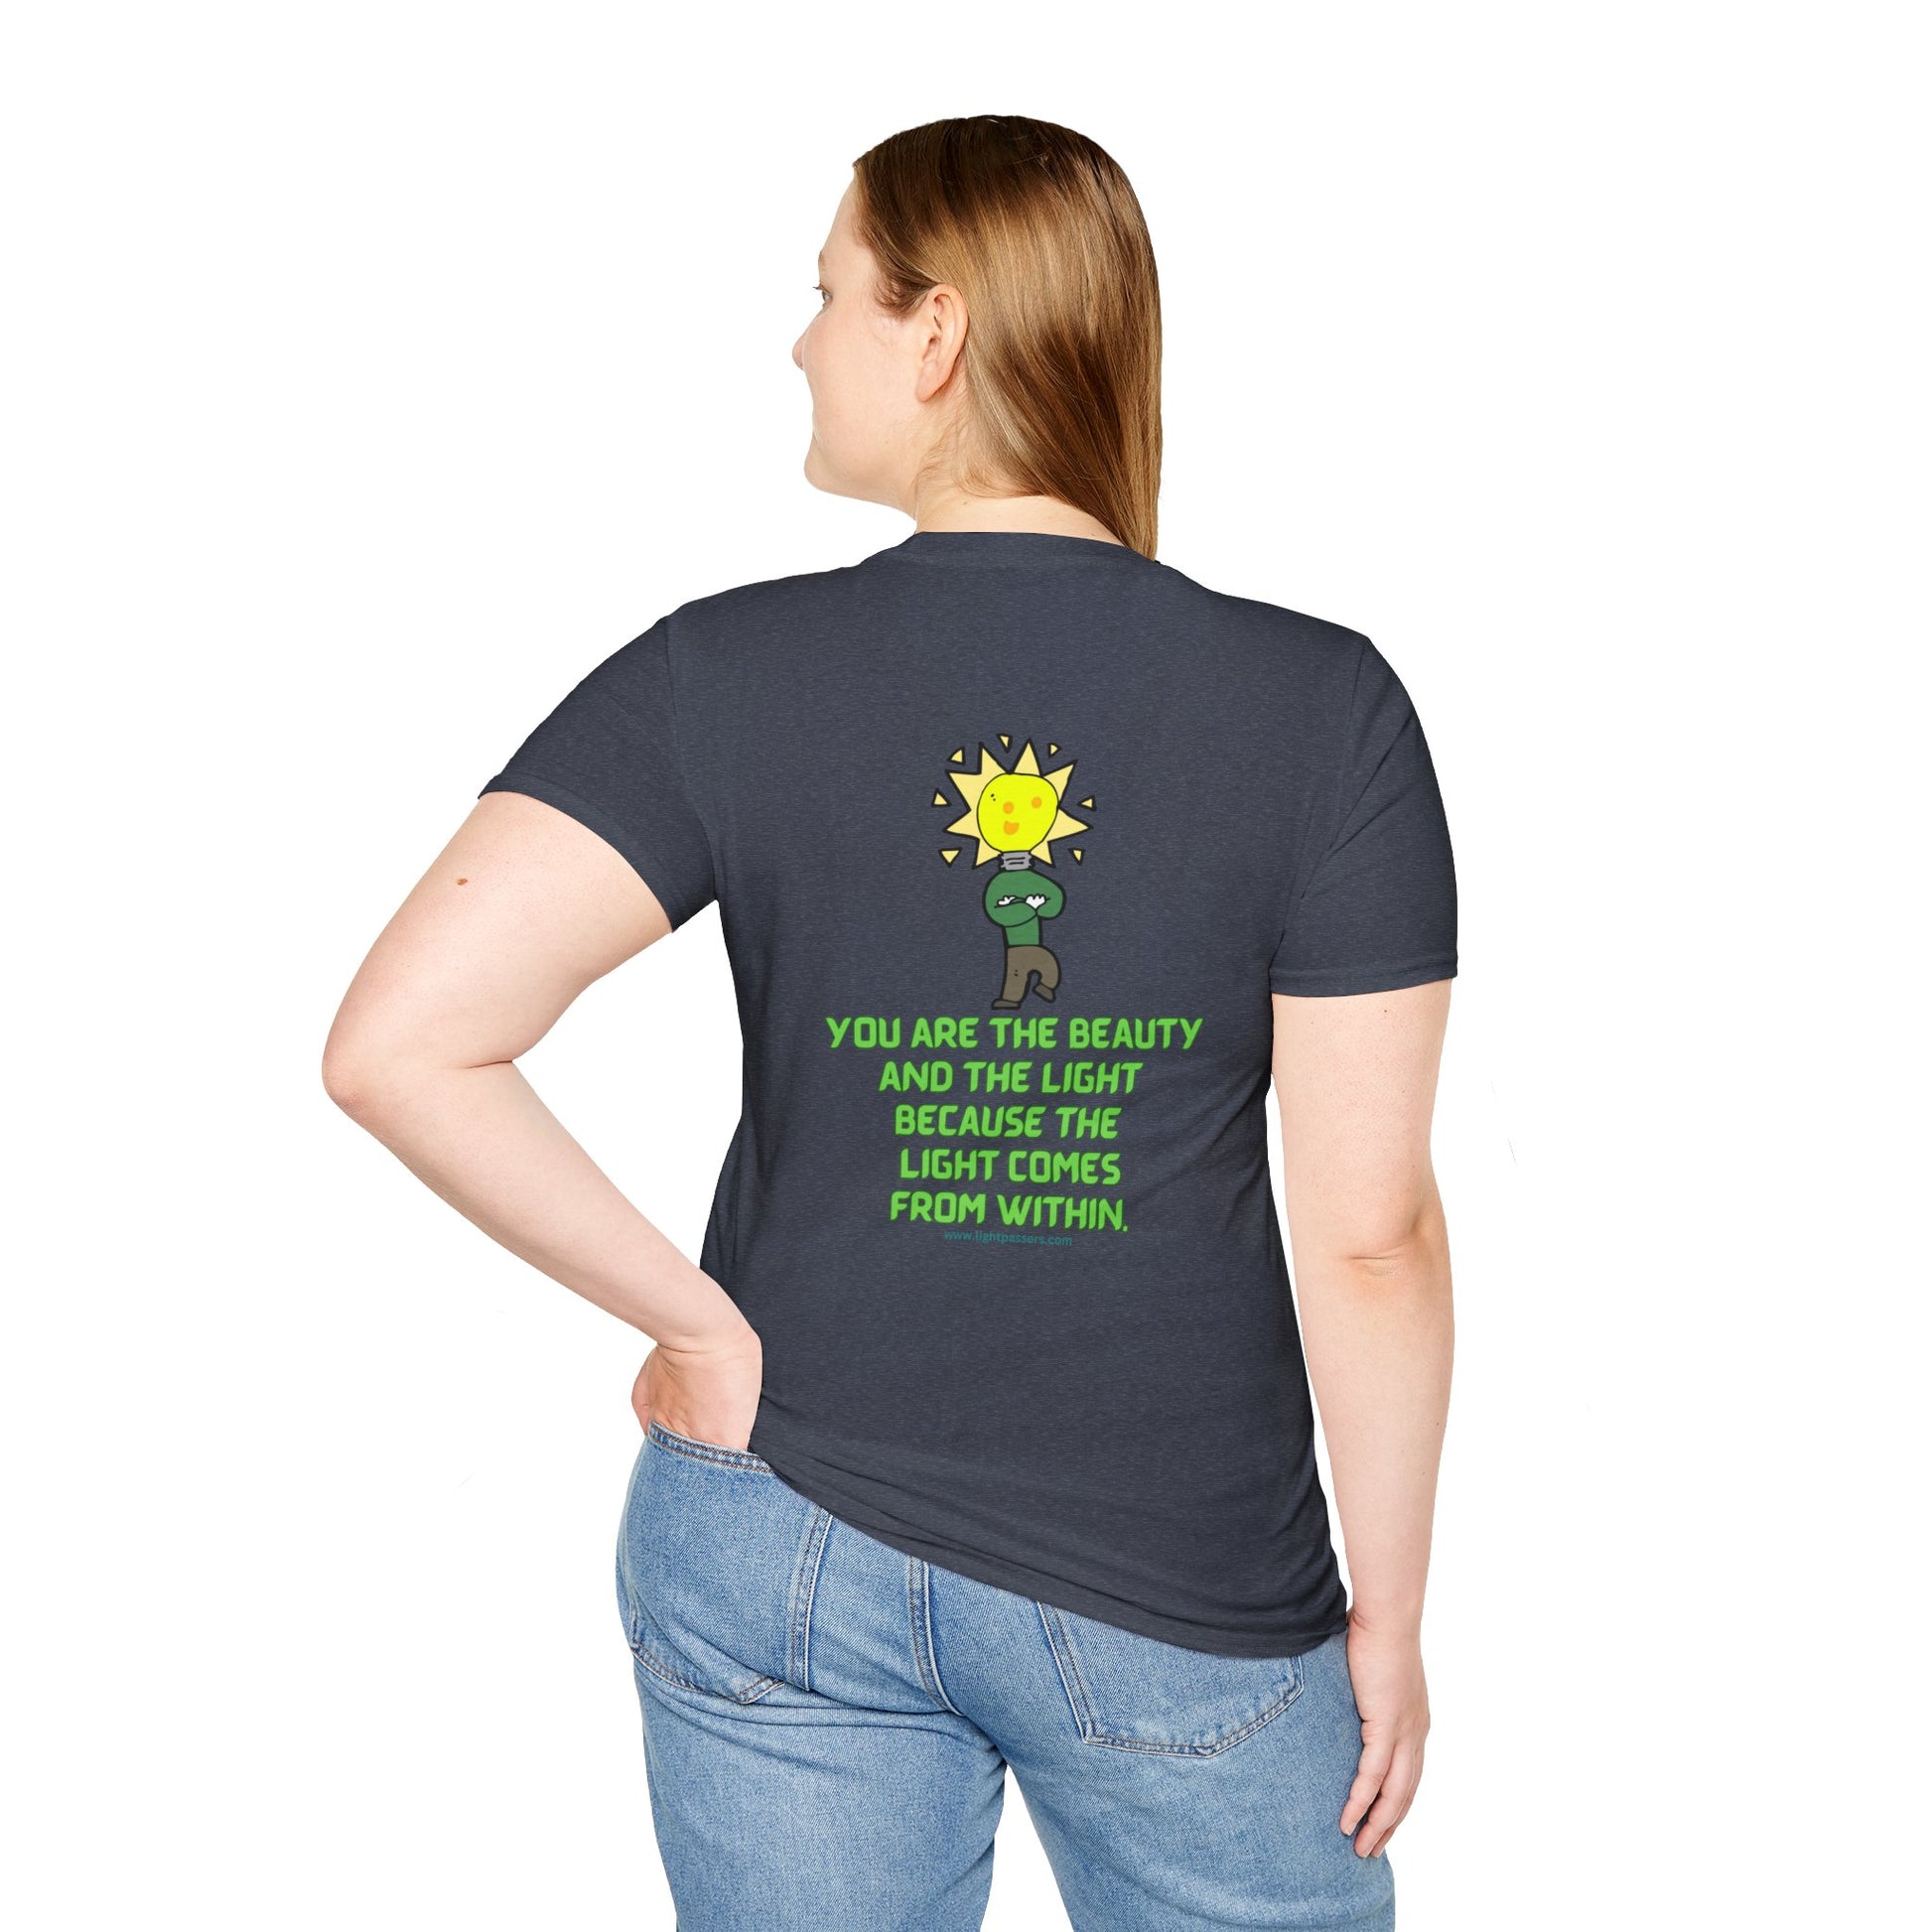 Unisex Beauty and the Light T-shirt BACK featuring a woman in a cartoon light bulb tee, close-up fabric with writing, and person's back with text. Classic fit, 100% cotton, tear-away label.